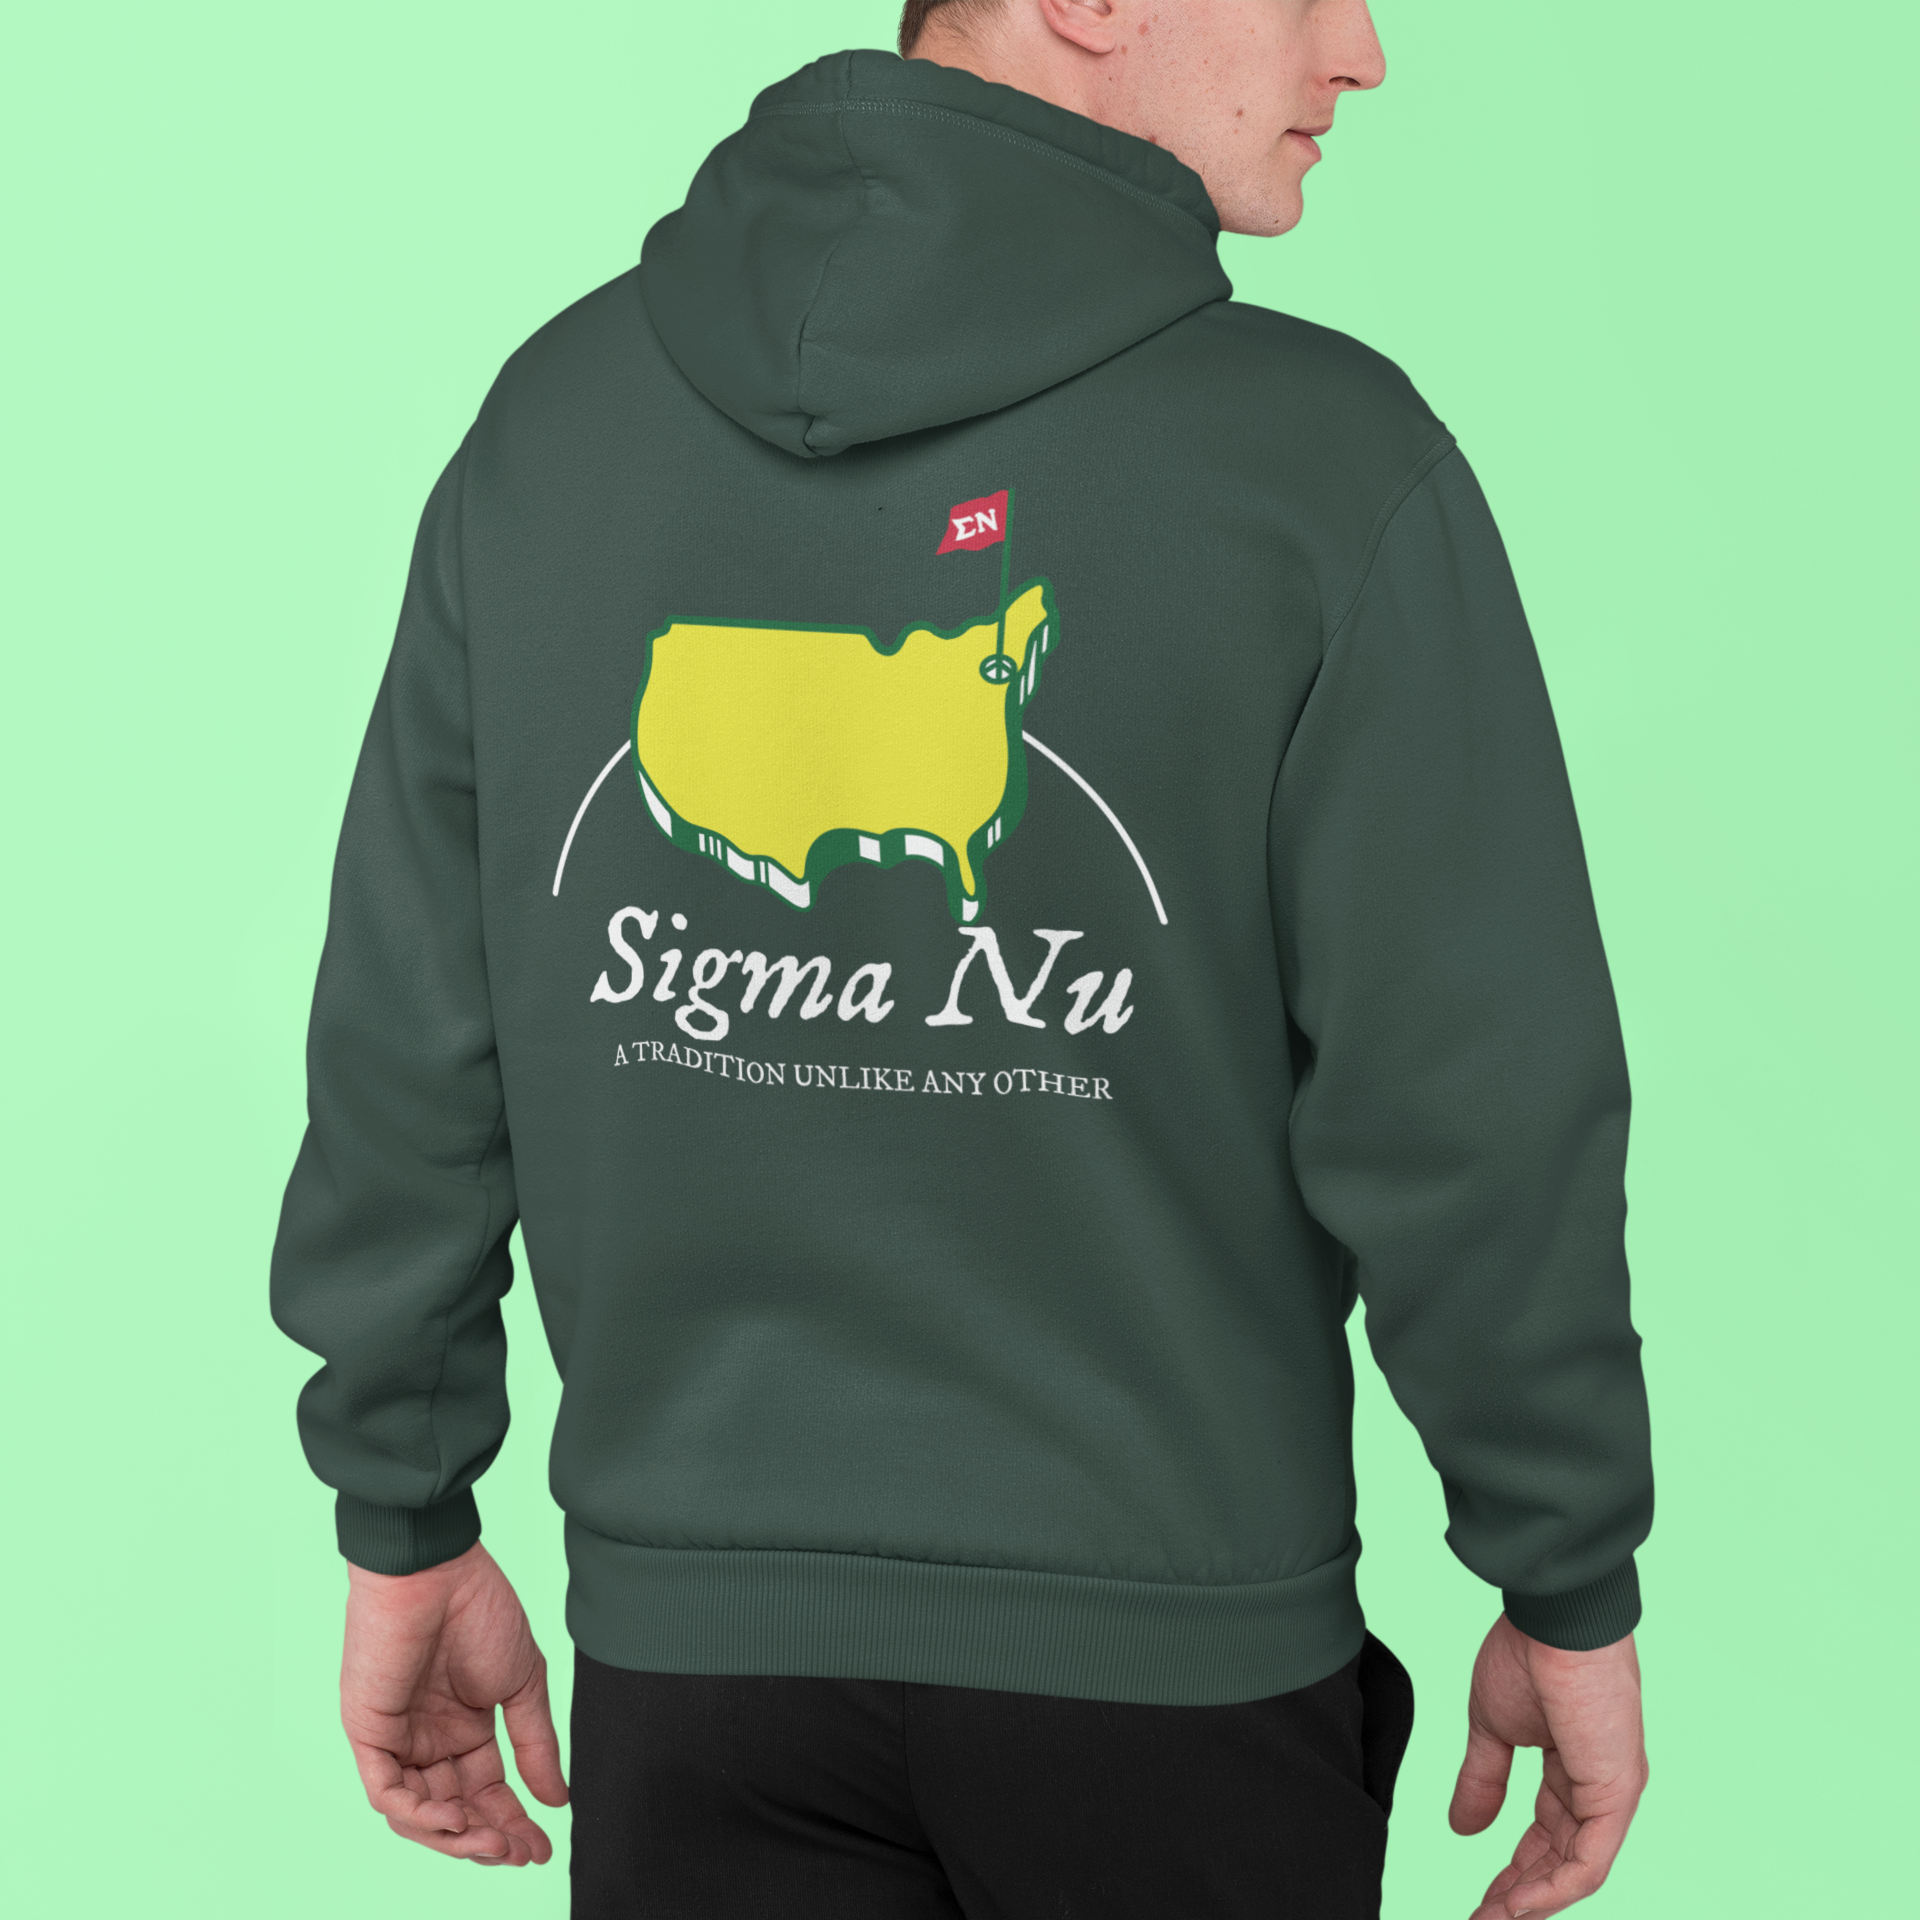 Sigma Nu Graphic Hoodie | The Masters | Sigma Nu Clothing, Apparel and Merchandise back model 